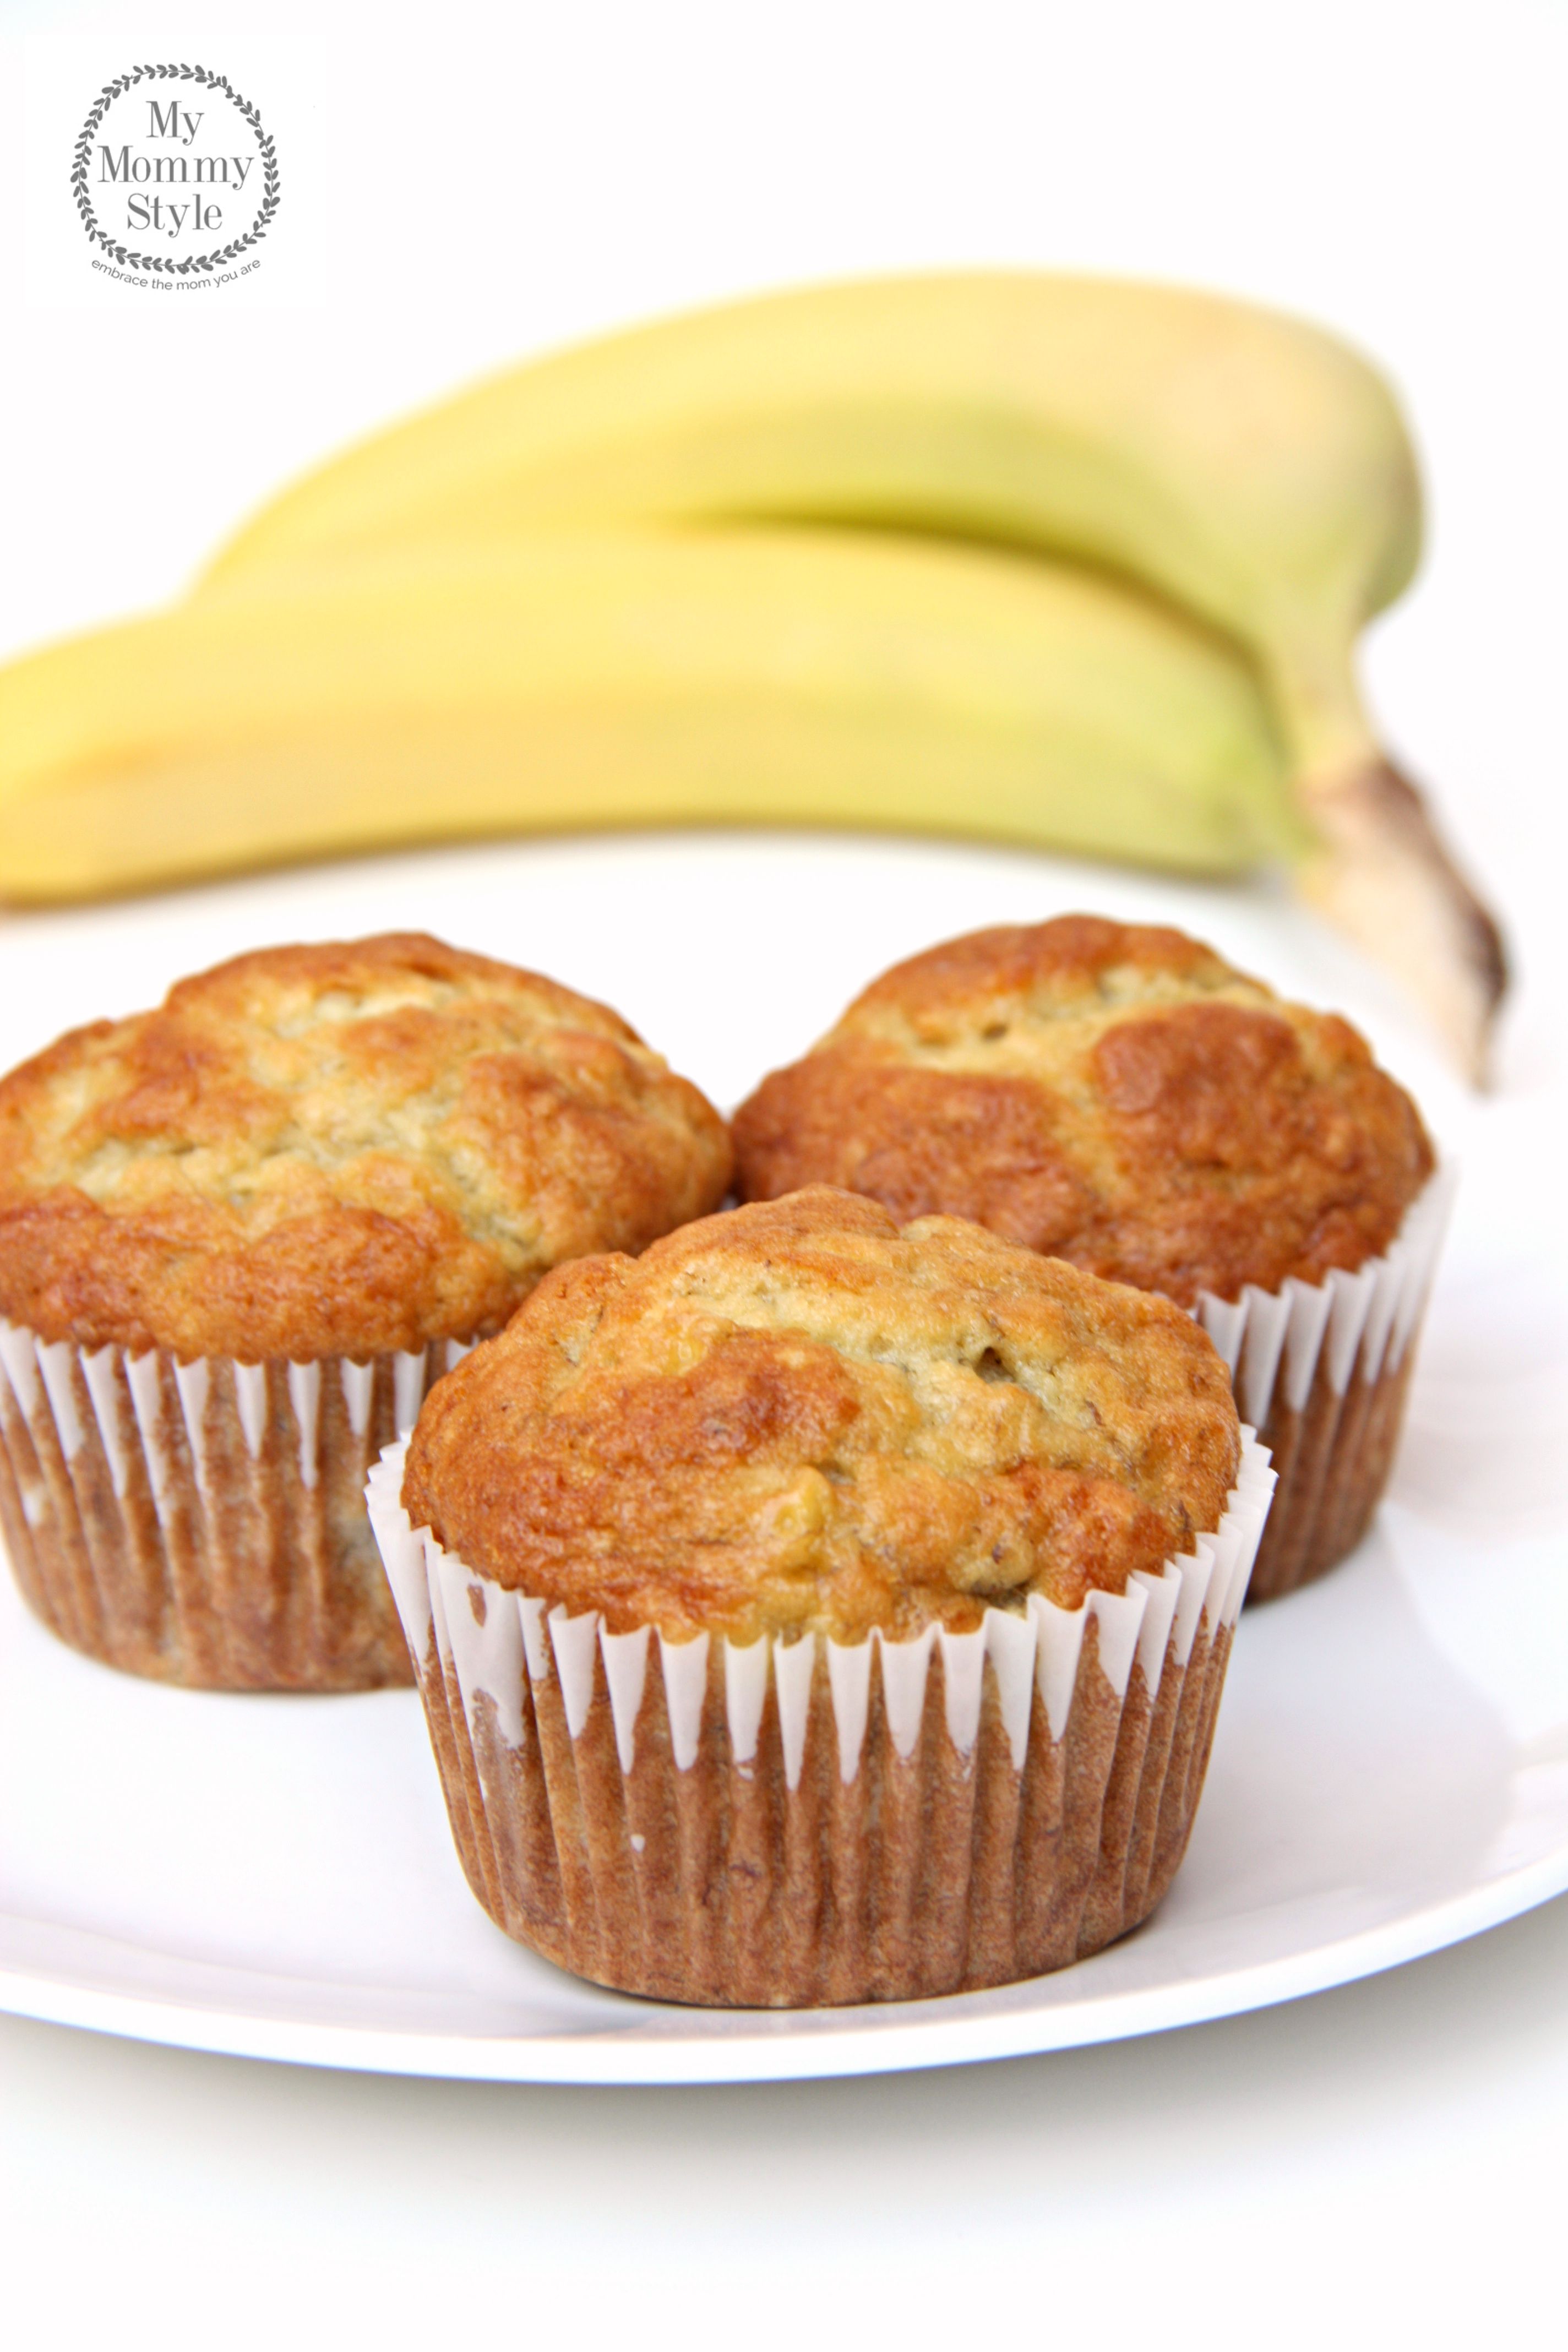 Perfect Banana Muffins {with video} - My Mommy Style